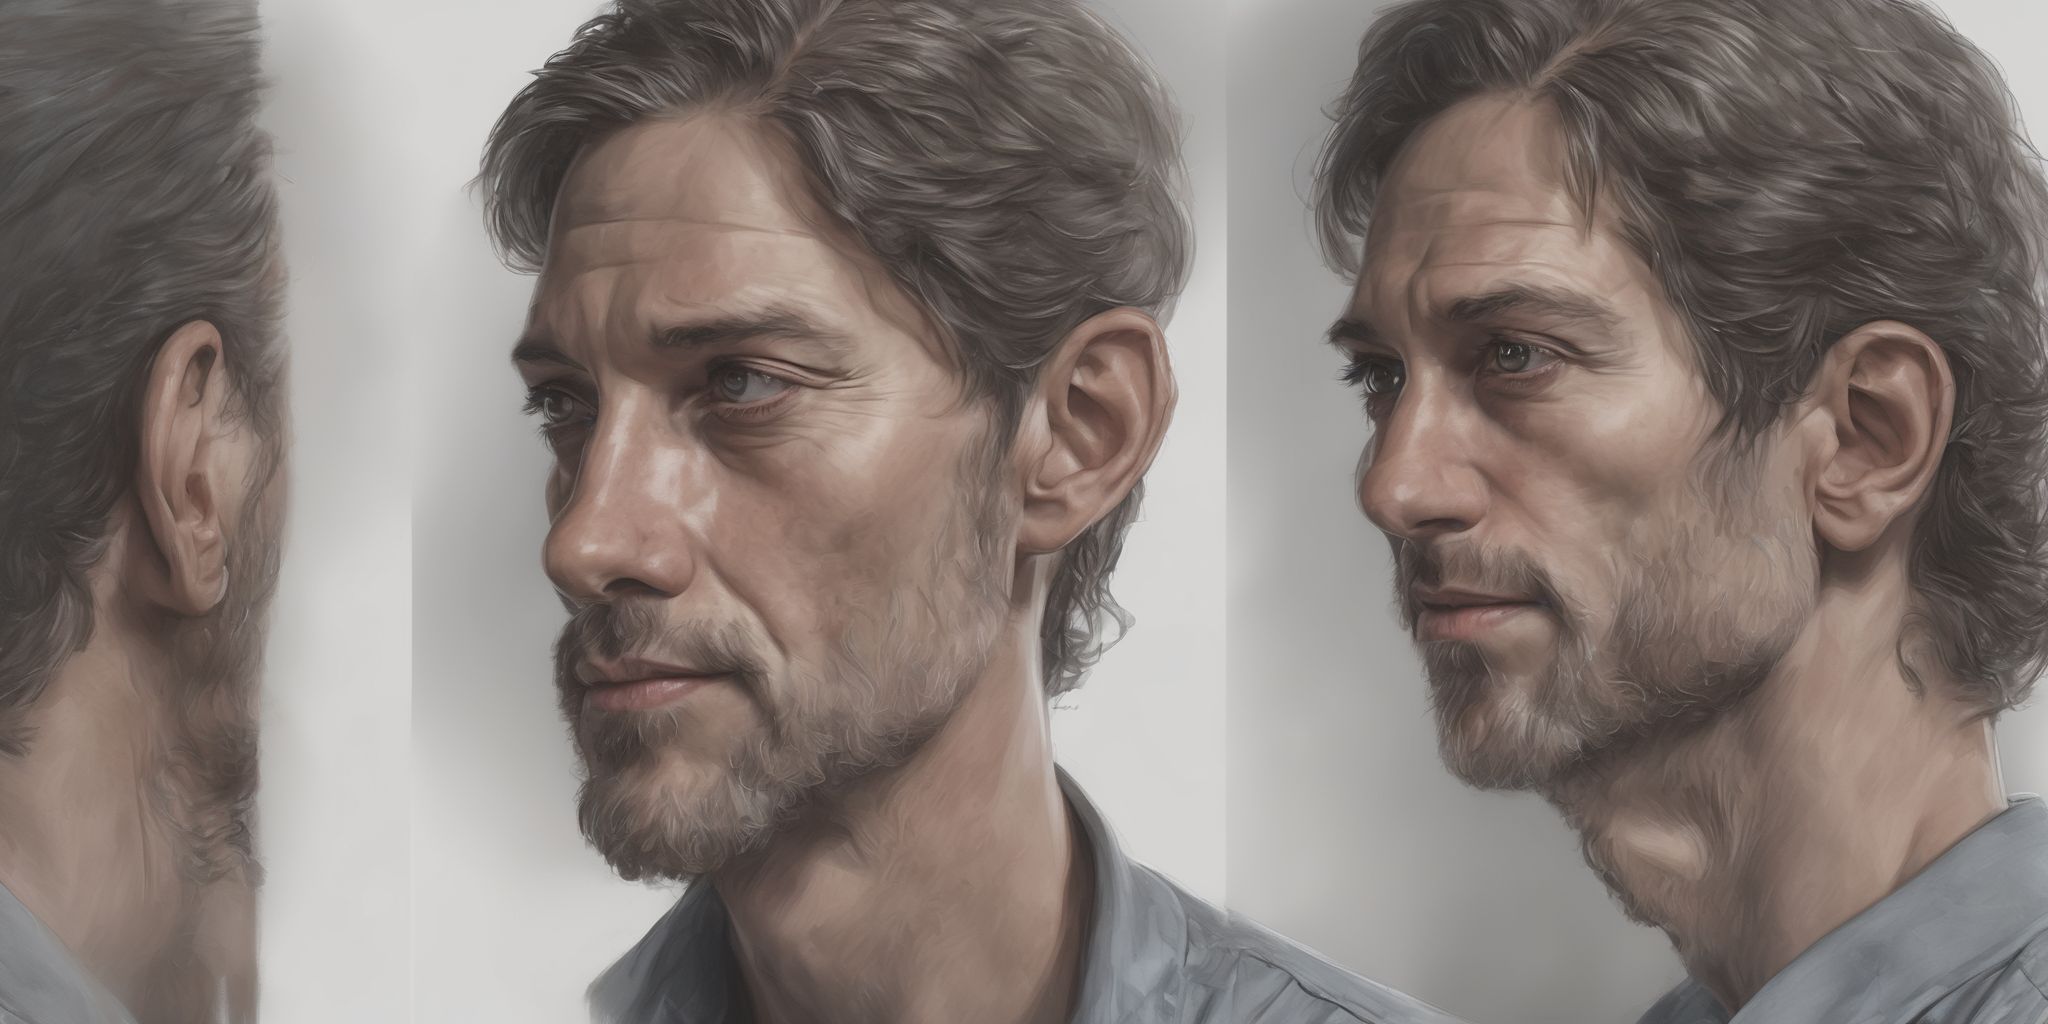 Will  in realistic, photographic style